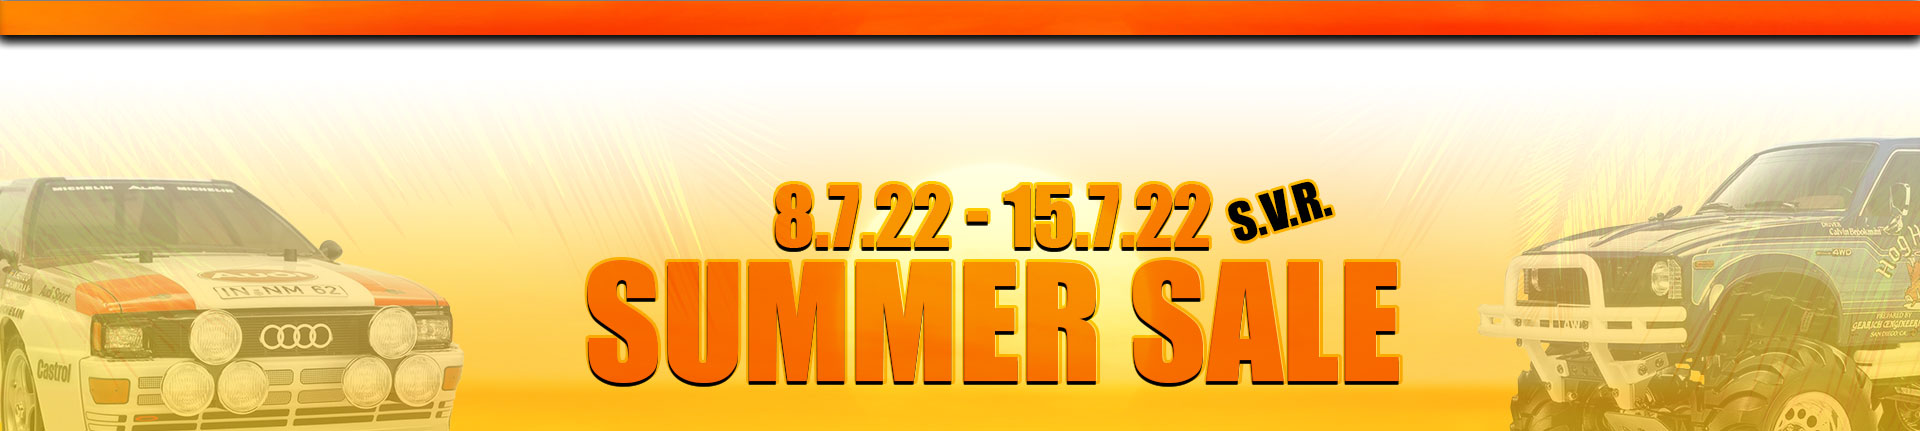 Low_Banner_DownDetail1920x431